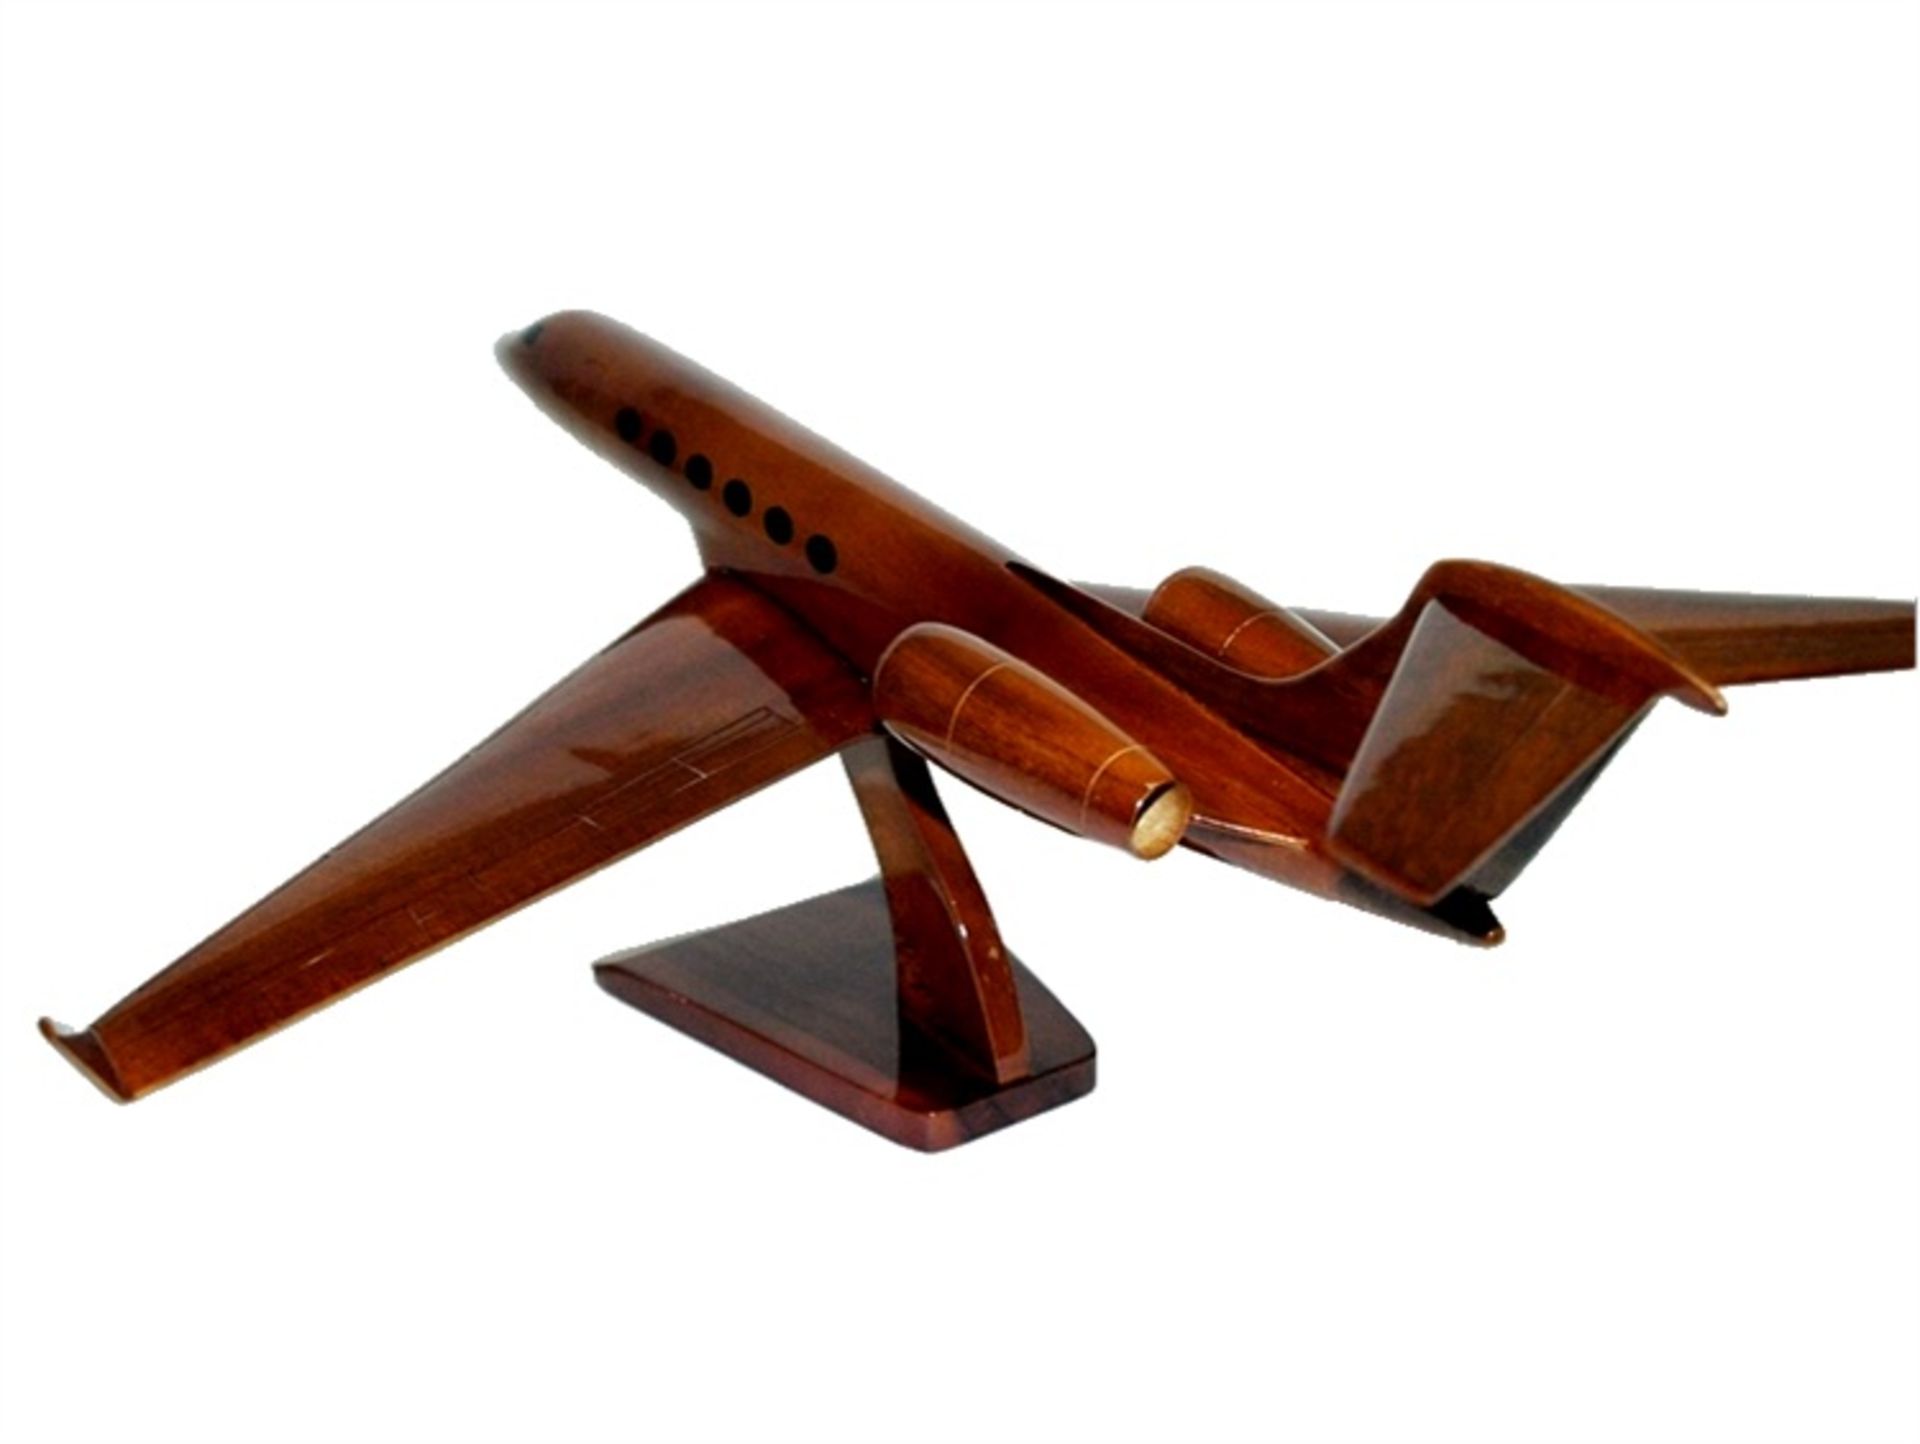 Gulfstream 550 Wooden Scale Desk Display - Image 3 of 5